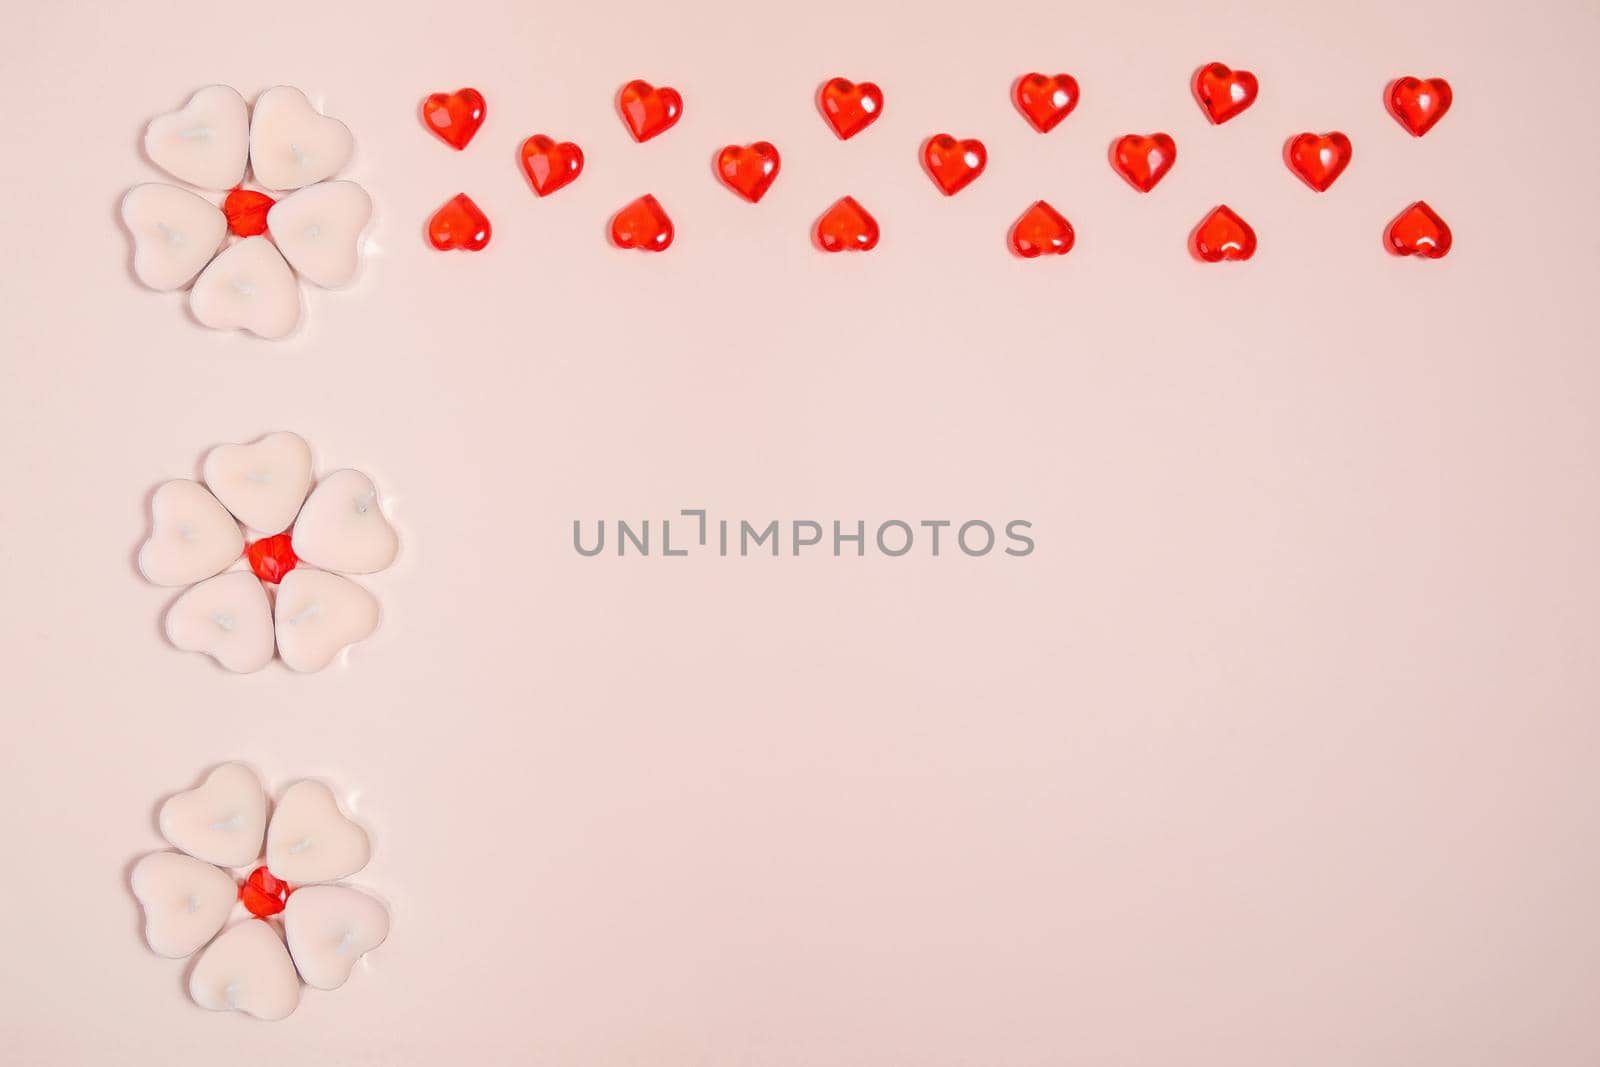 Valentine's Day, composition of hearts on a pink background. View from above. Space for text, flat lay